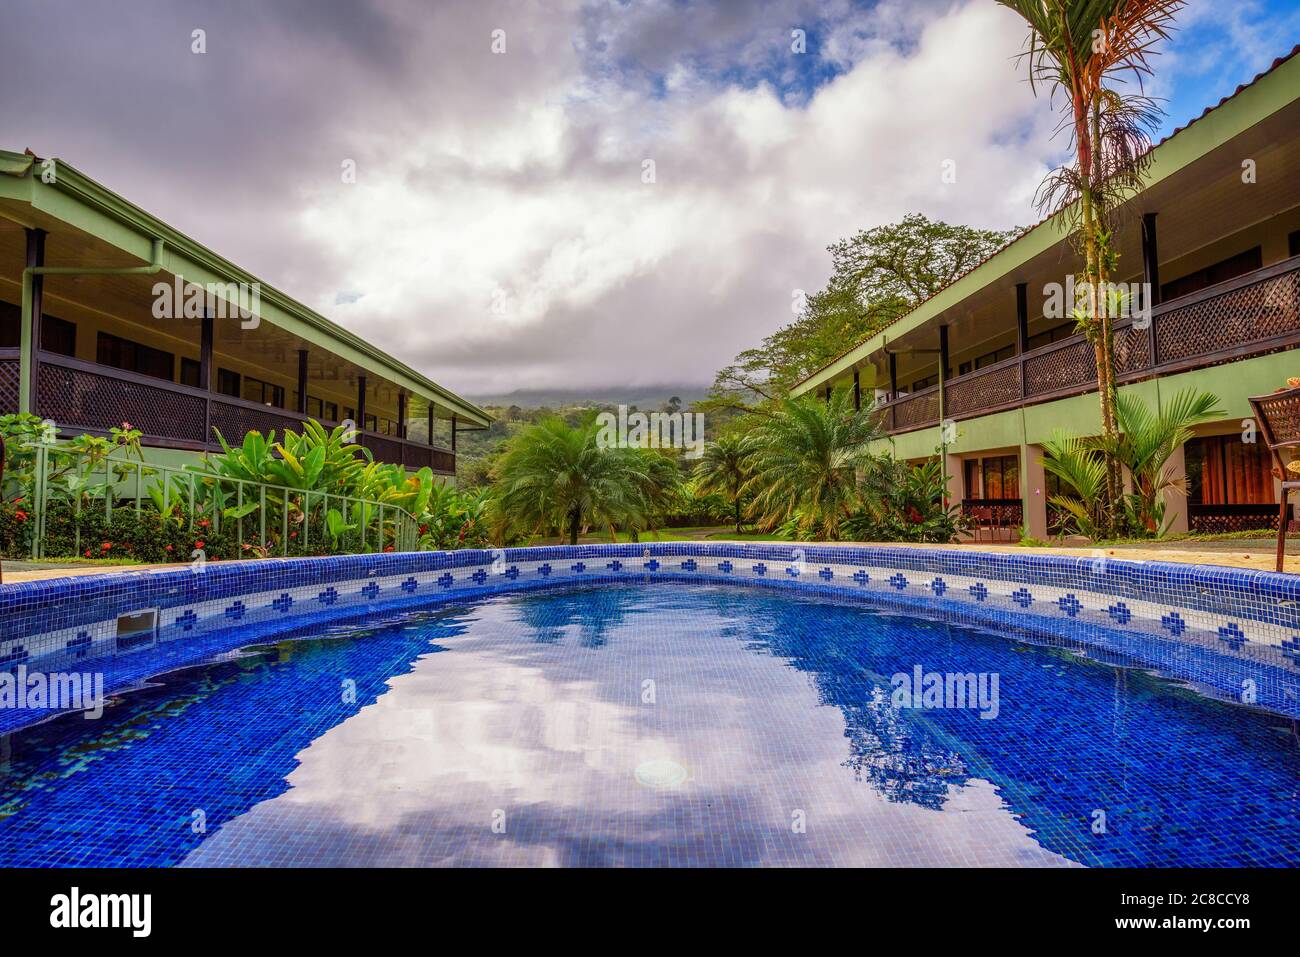 La Fortuna, Costa Rica - January 16, 2020 : Hotel Lavas Tacotal with an outdoor pool. It is located in La Fortuna and offers excellent views of Arenal Stock Photo